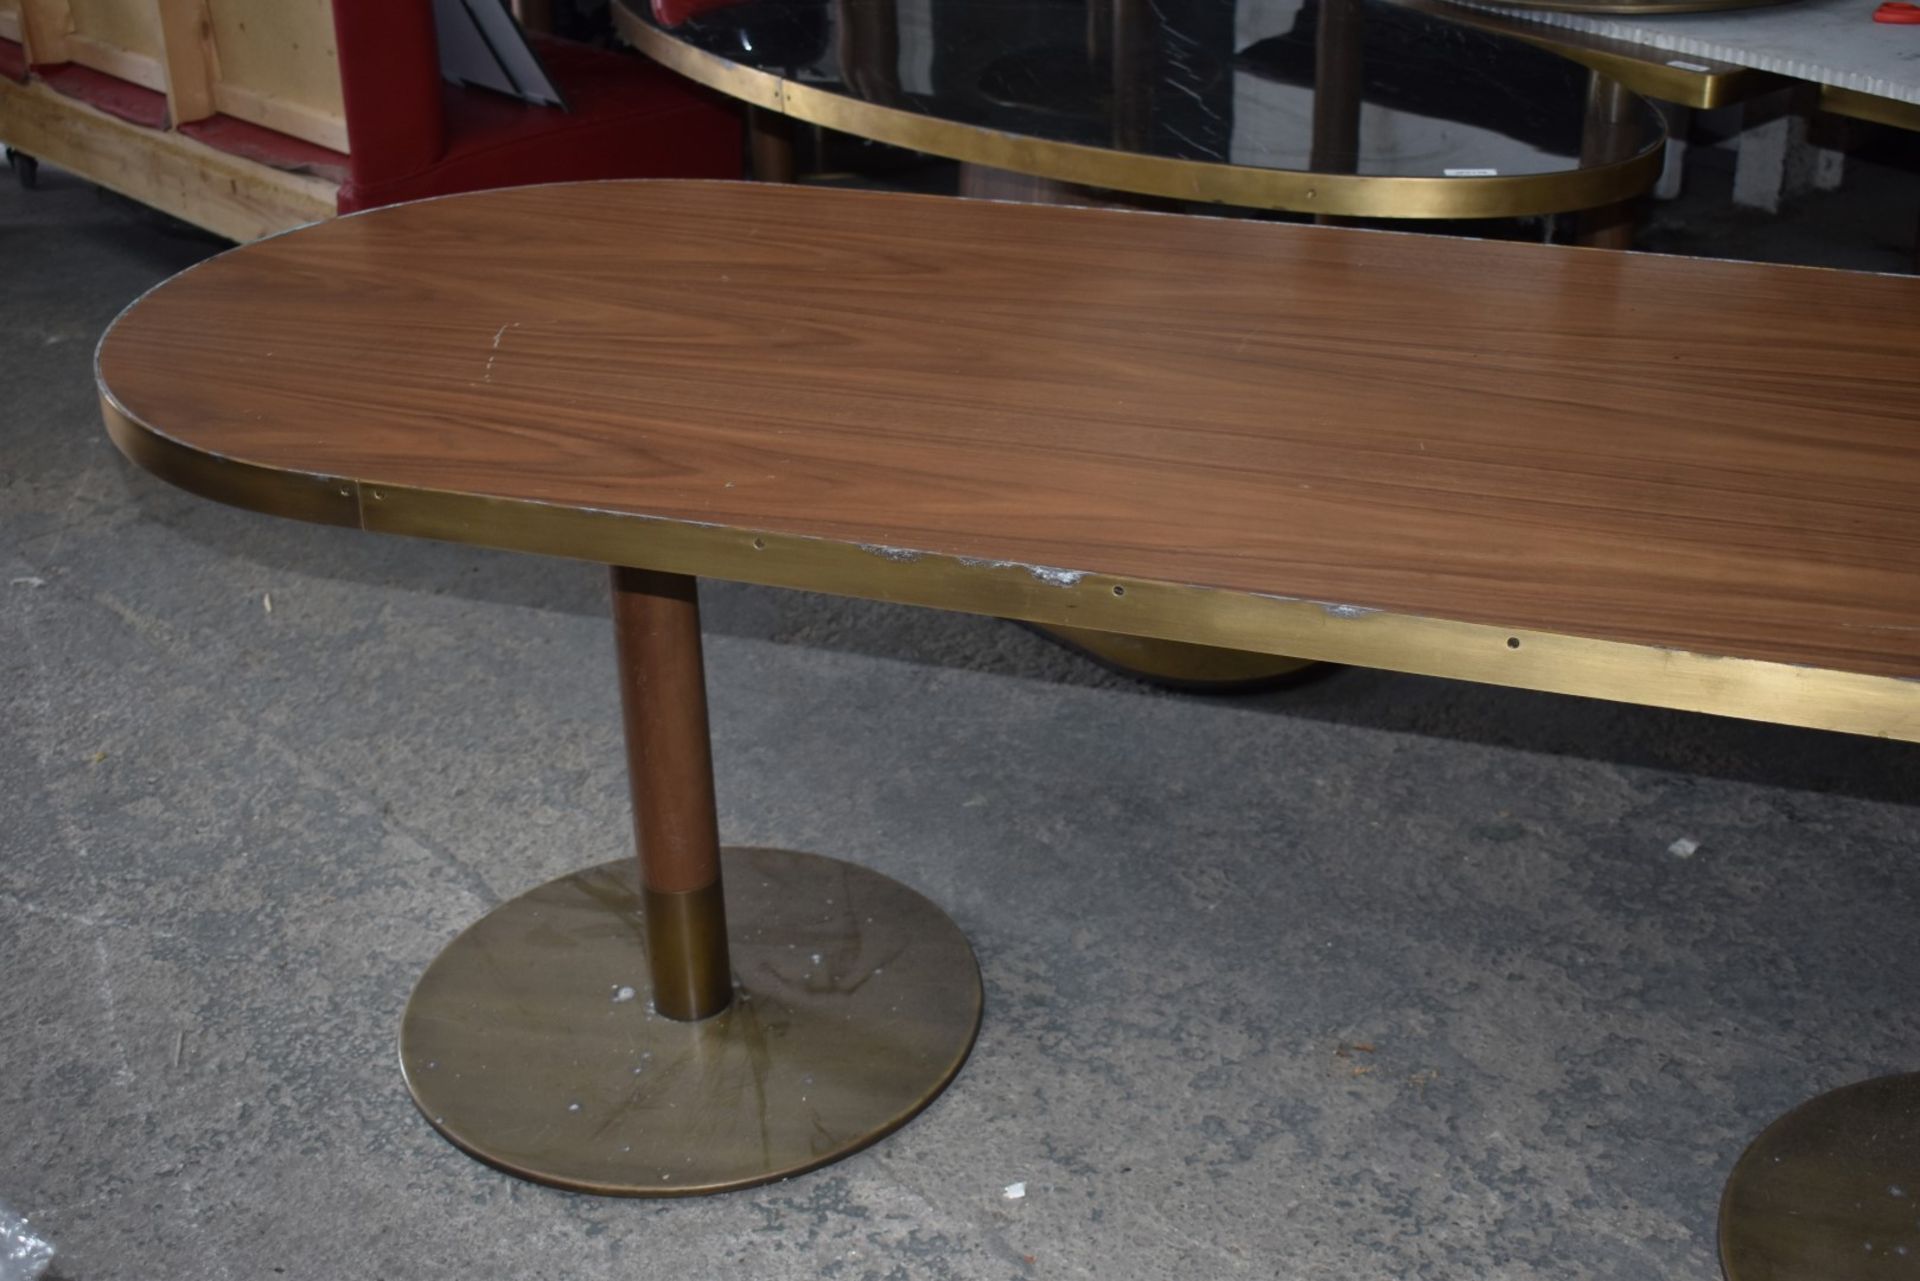 1 x Oval Banqueting Dining Table By AKP Design Athens - Walnut Top With Antique Brass Edging - Image 2 of 16